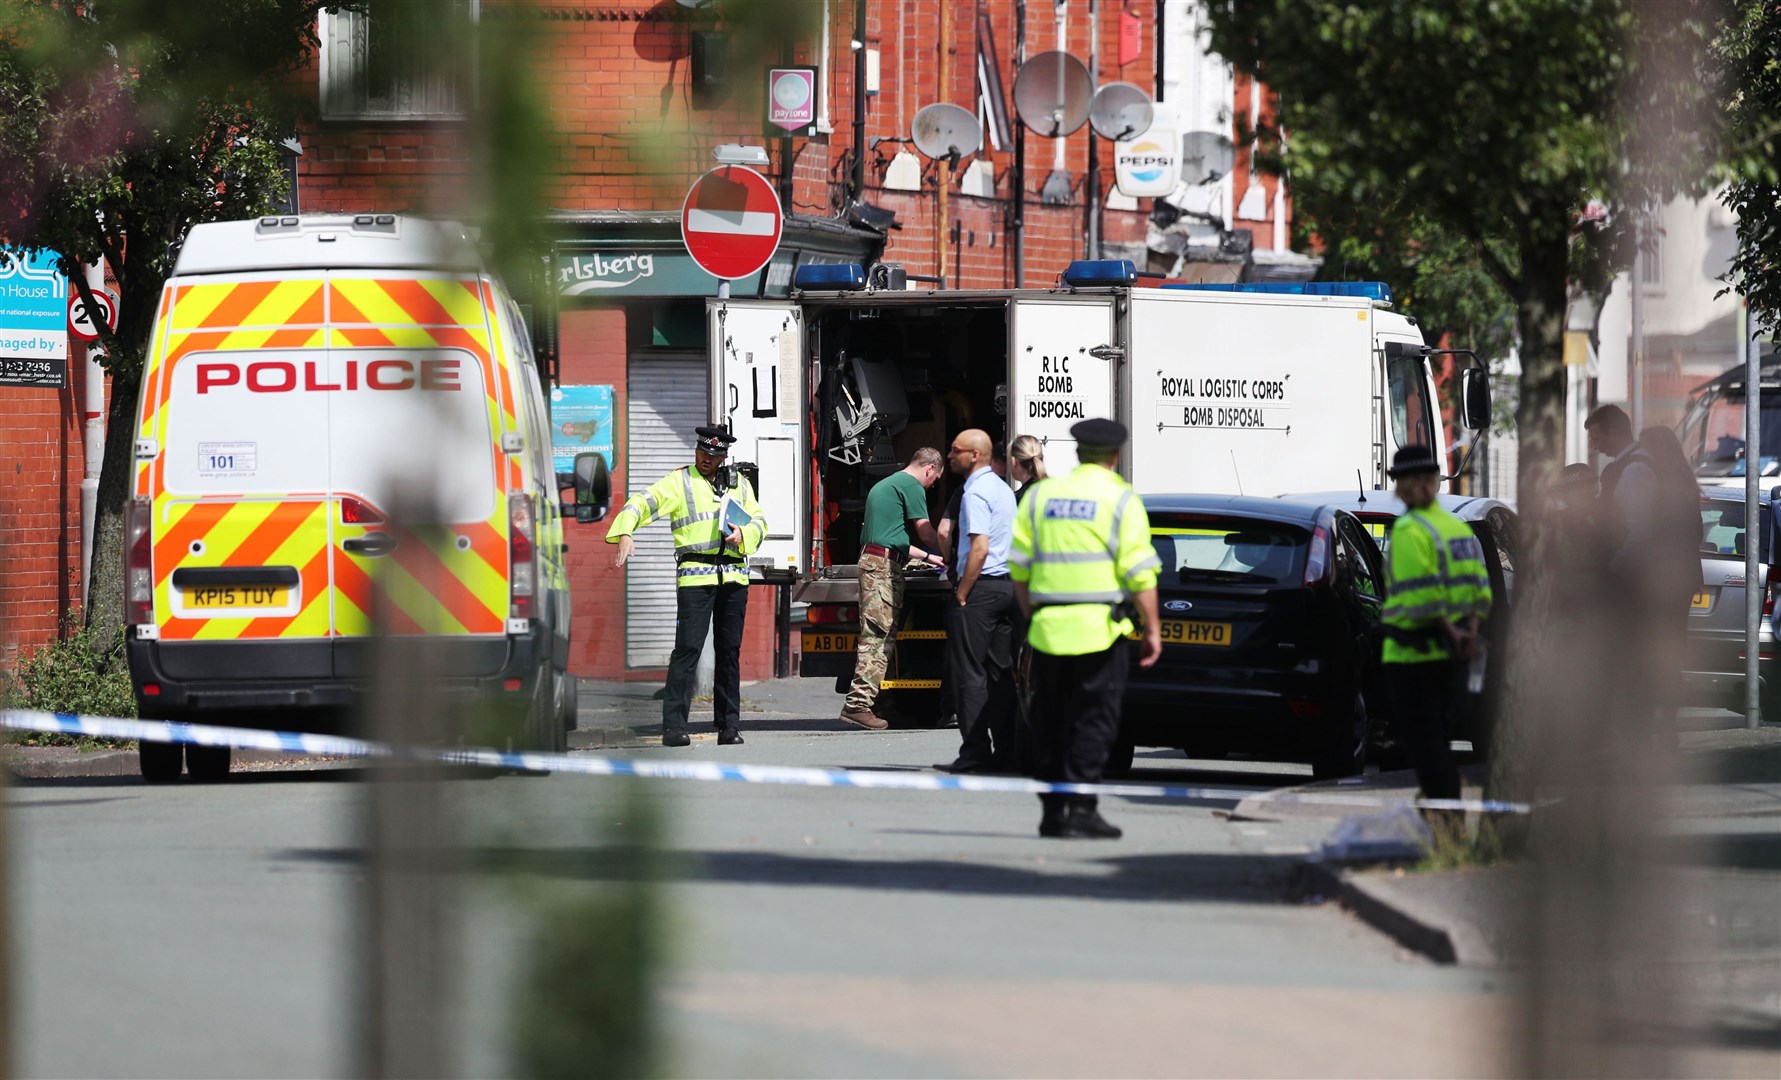 Police activity at a cordon in the Moss Side area of Manchester after the bombing (Jonathan Brady/PA)